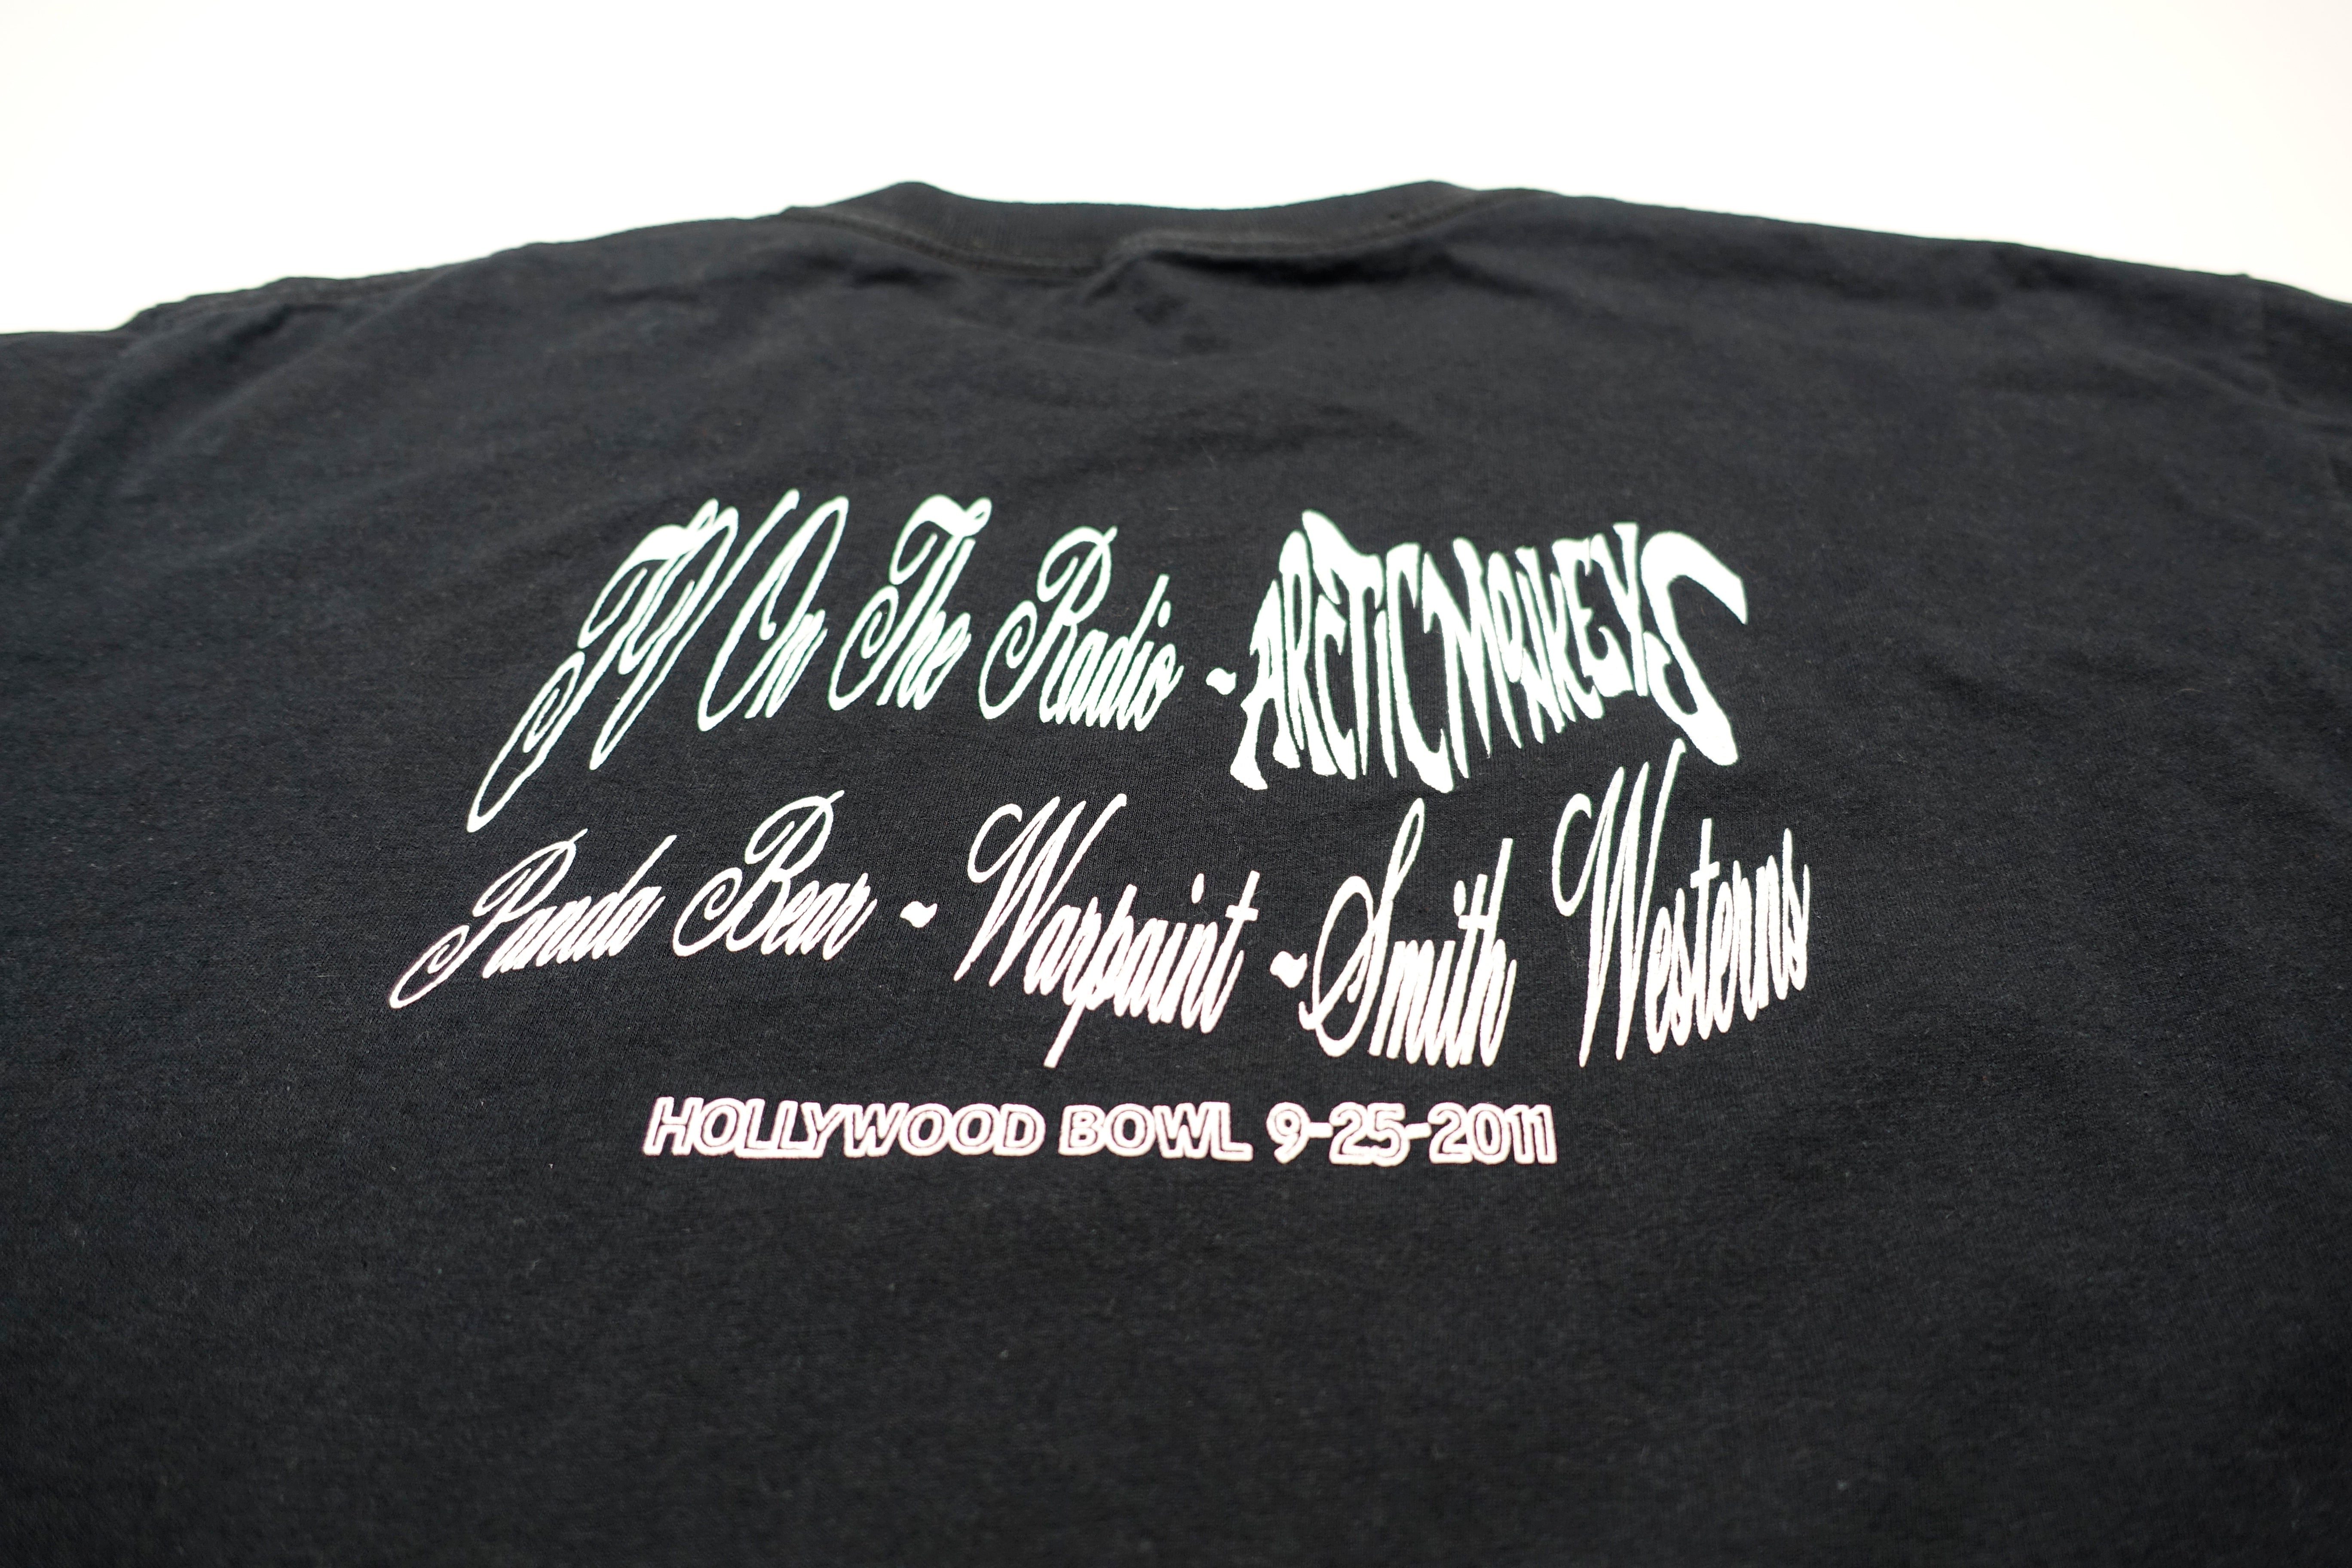 TV On The Radio - Fairy w/ Antlers Hollywood Bowl 2011 Tour Shirt Size Large (Maybe Bootleg?)